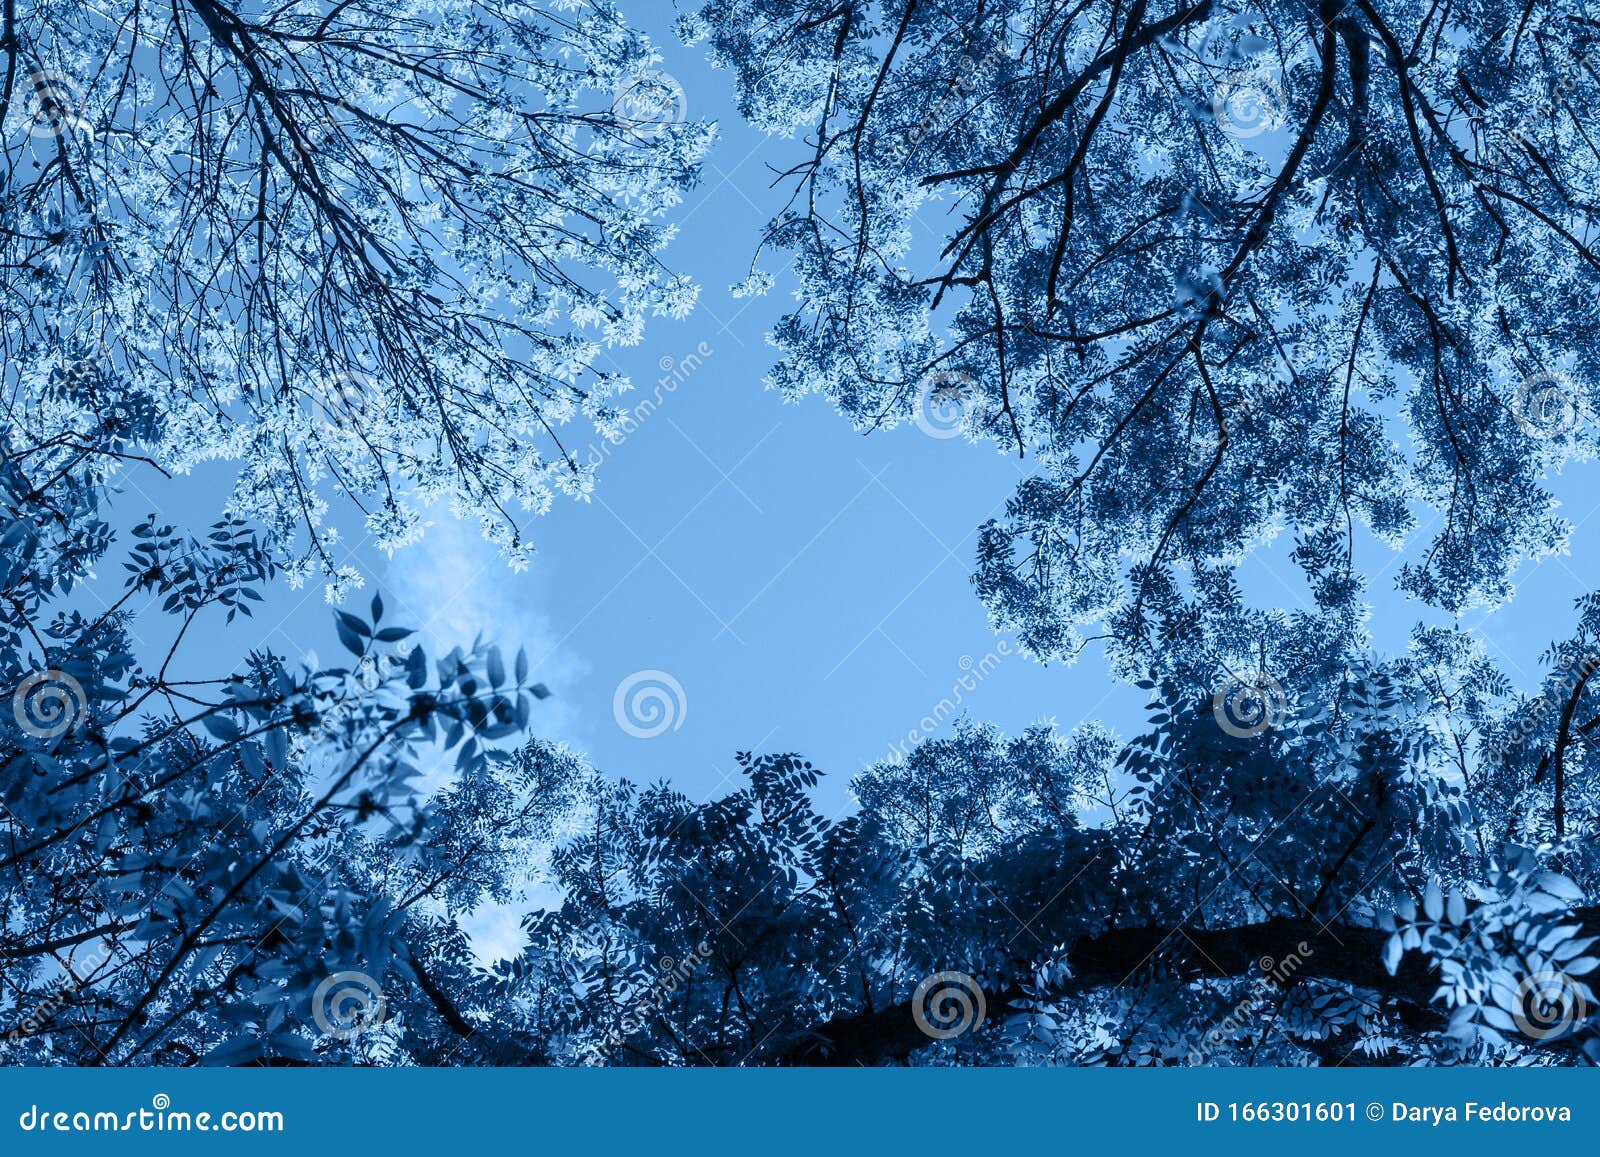 Beautiful and vibrant Blue colour ka background for your design and artwork